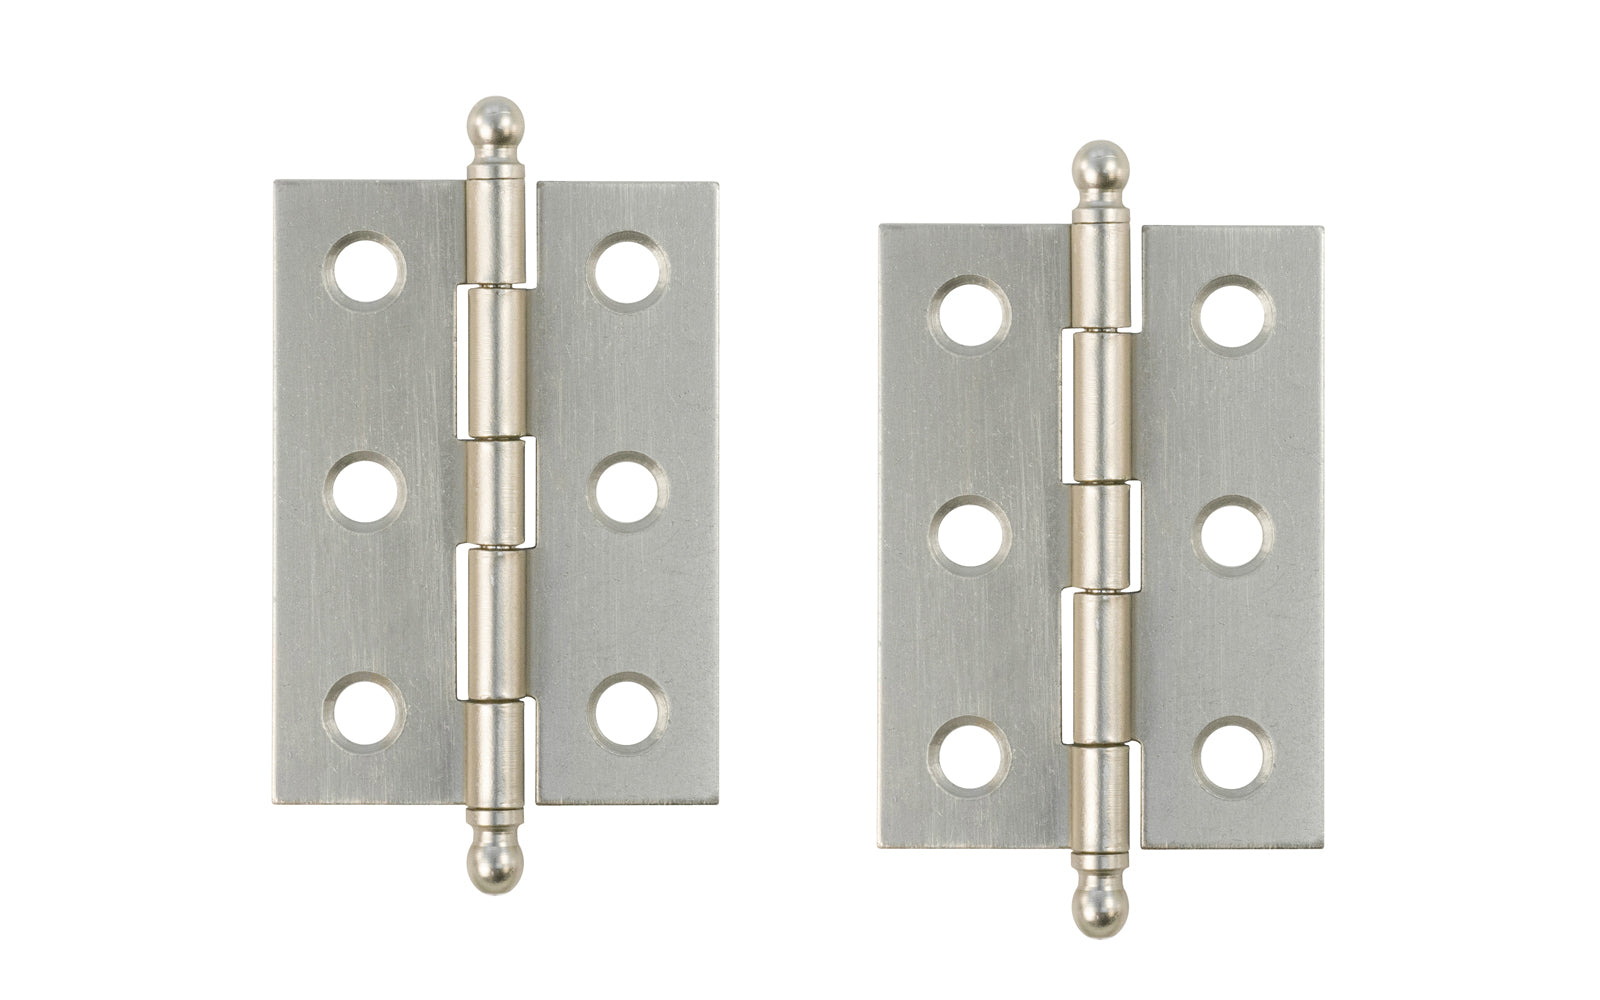 Traditional & classic ball-tip steel cabinet hinges with loose pins. Removable hinge pins which makes for easy installation when working with cabinets. 2" high x 1-3/8" wide. Sold as a pair of hinges. Brushed Nickel finish.